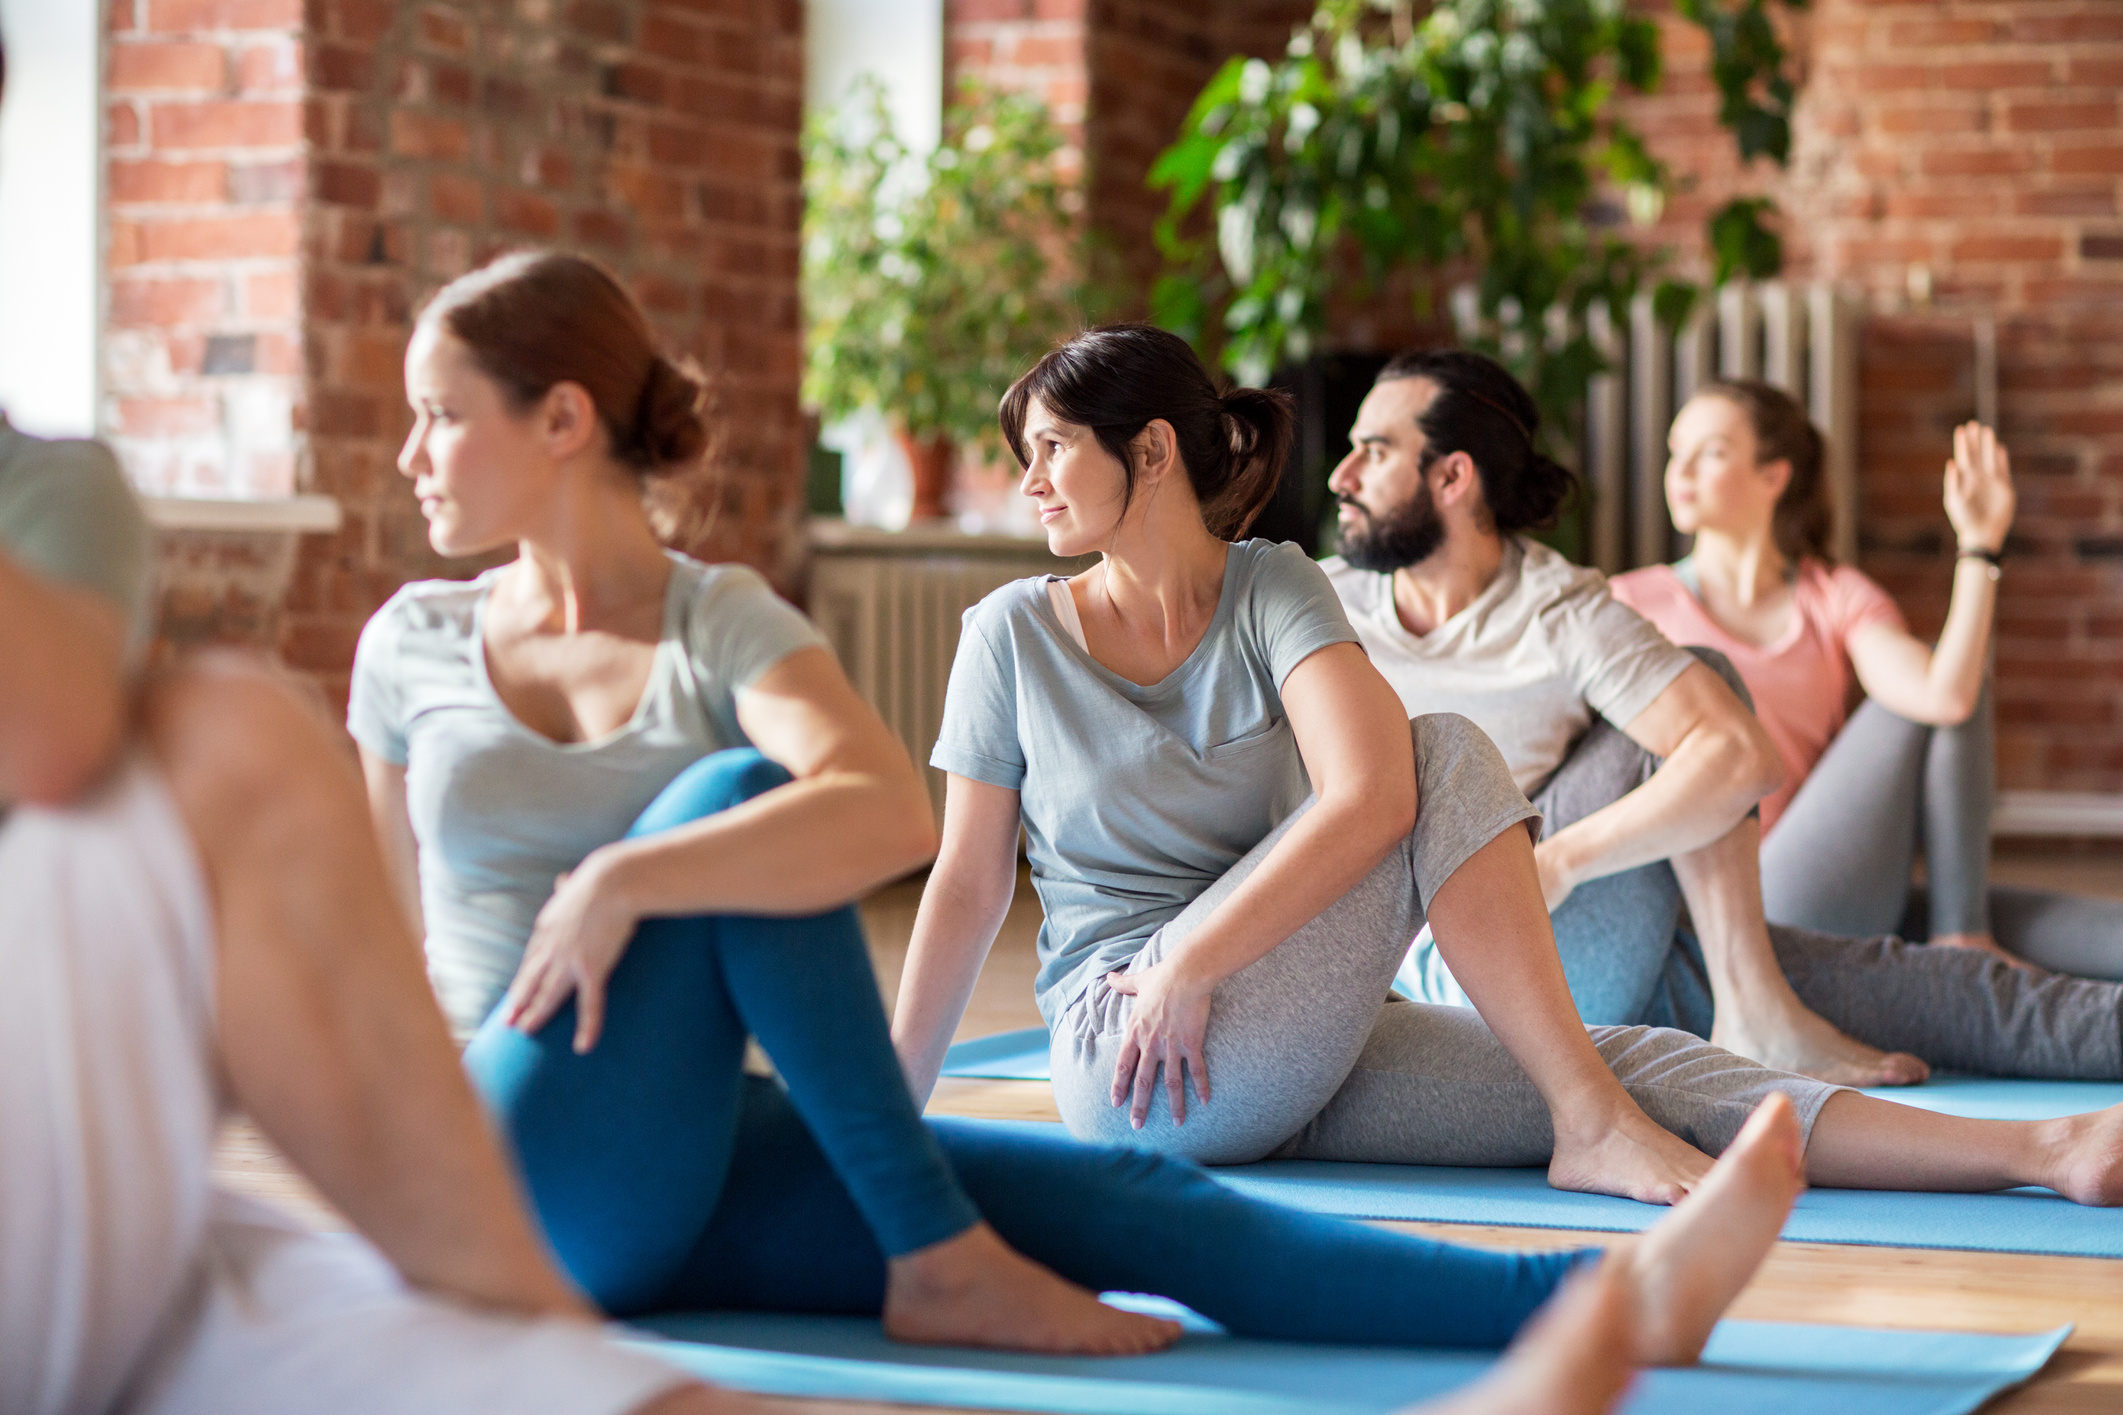 Group of People Doing Yoga Exercises